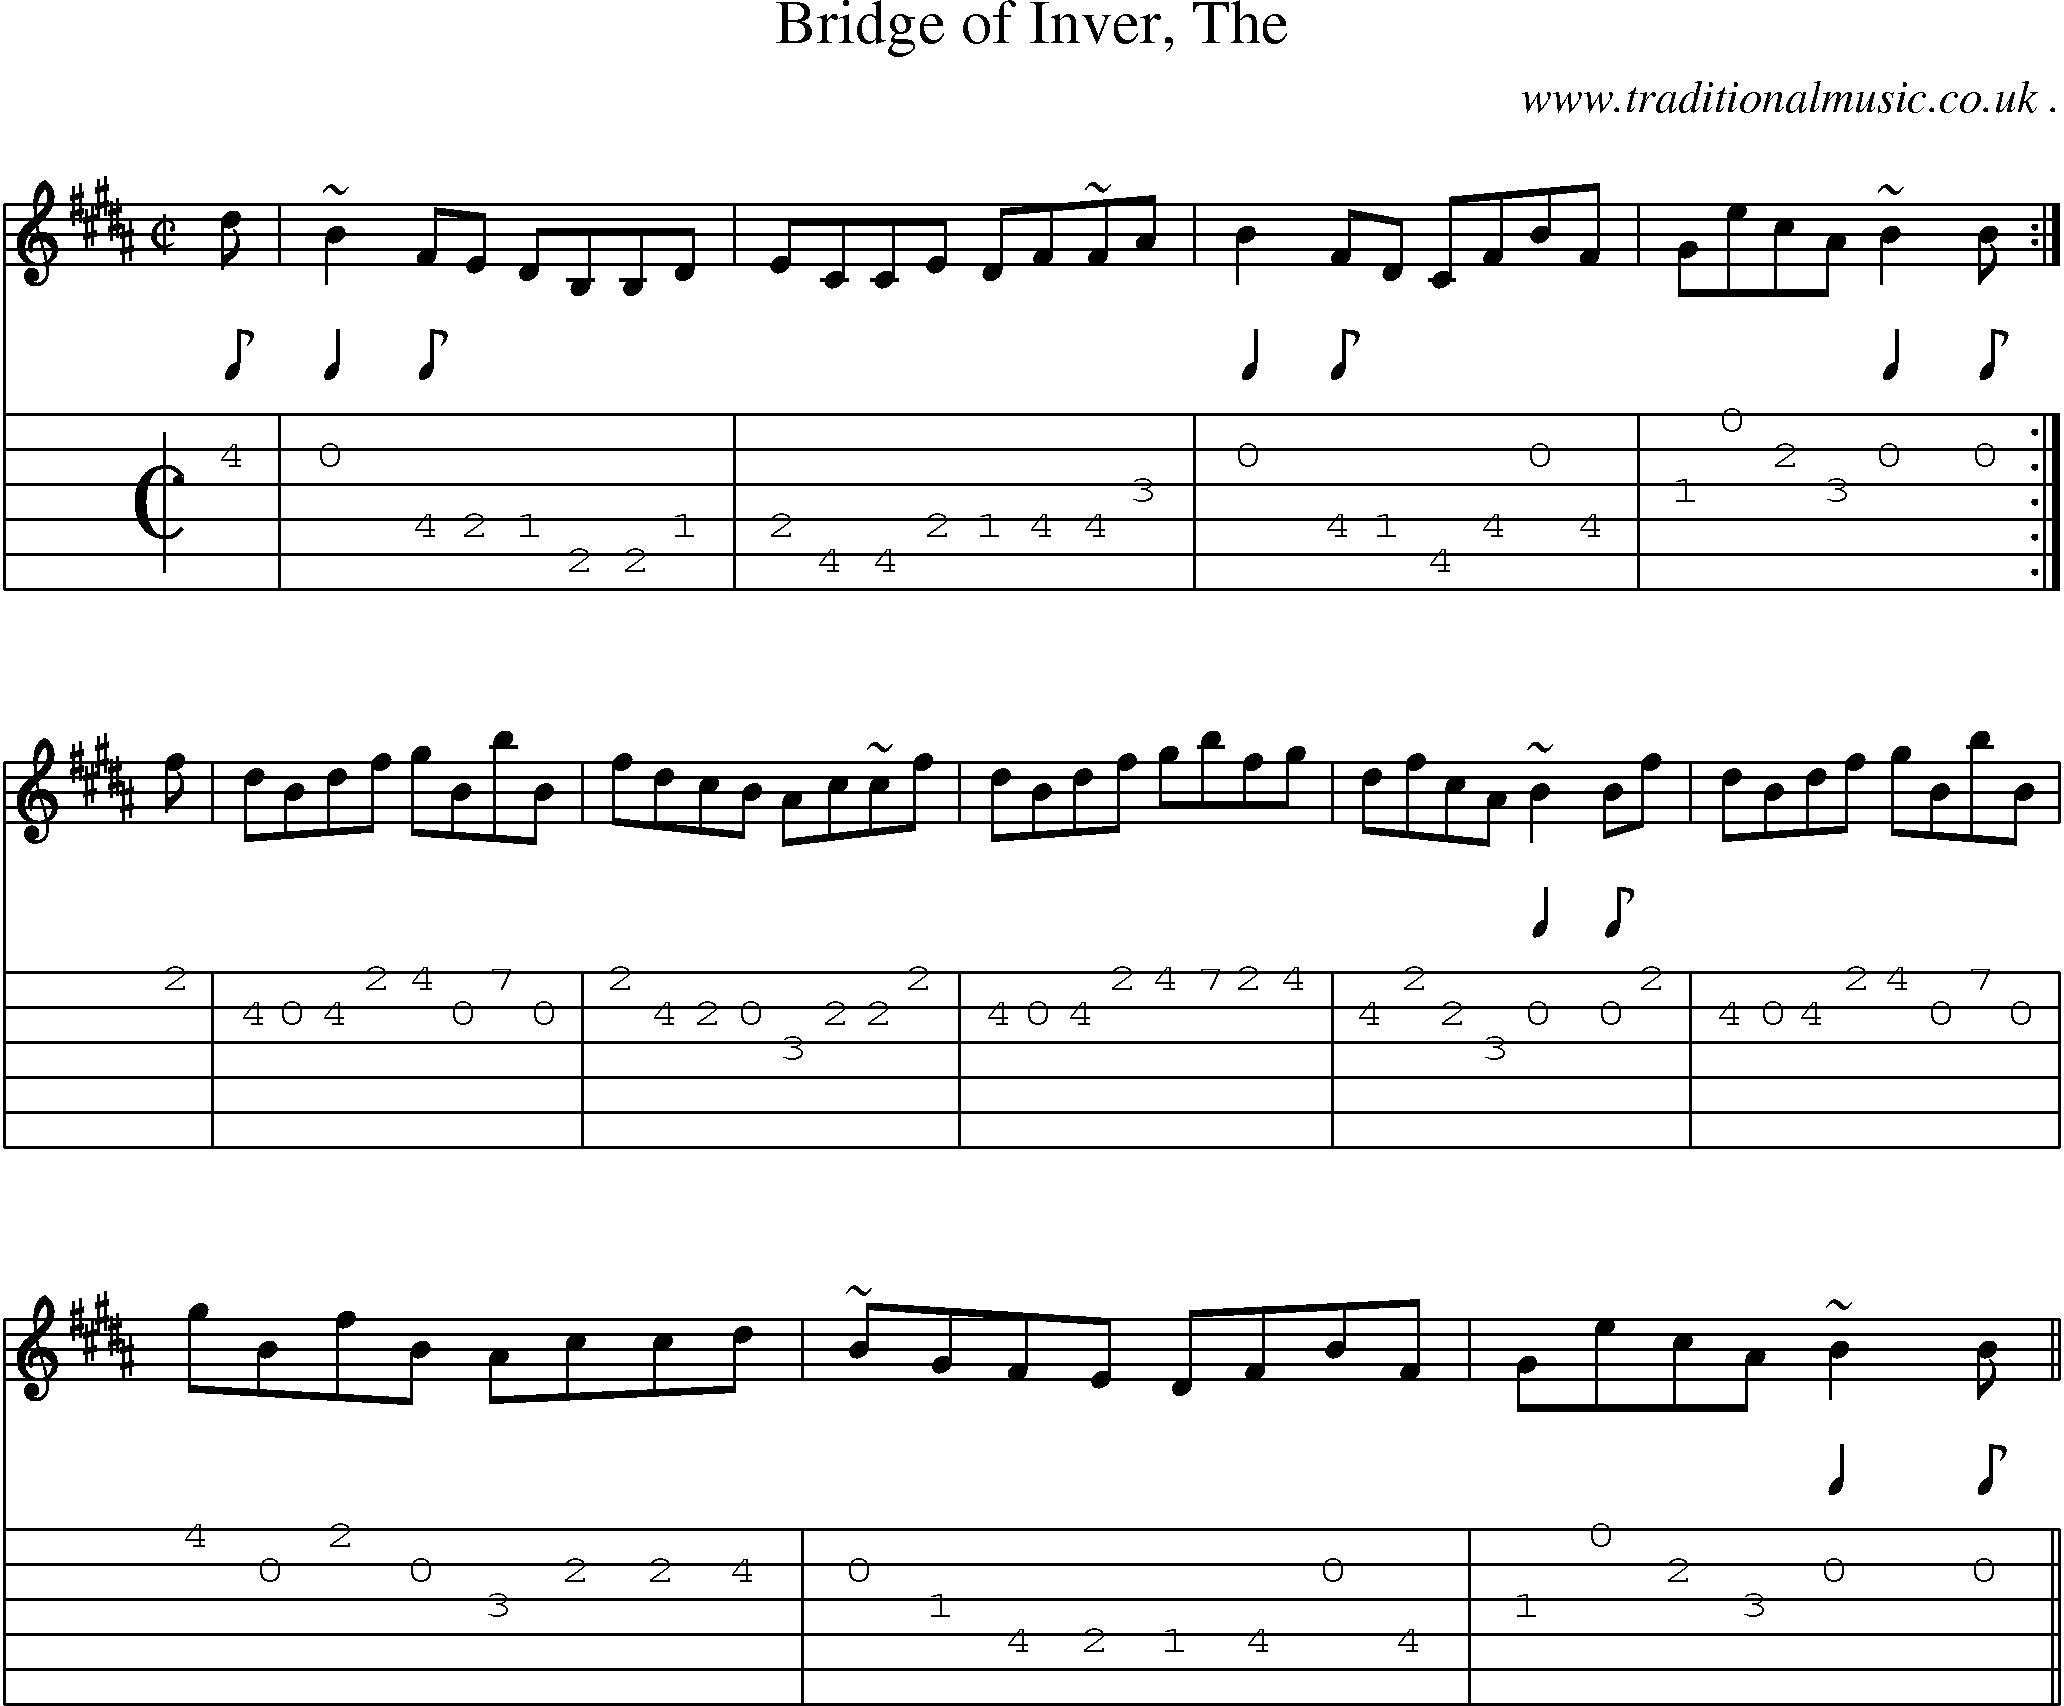 Sheet-music  score, Chords and Guitar Tabs for Bridge Of Inver The